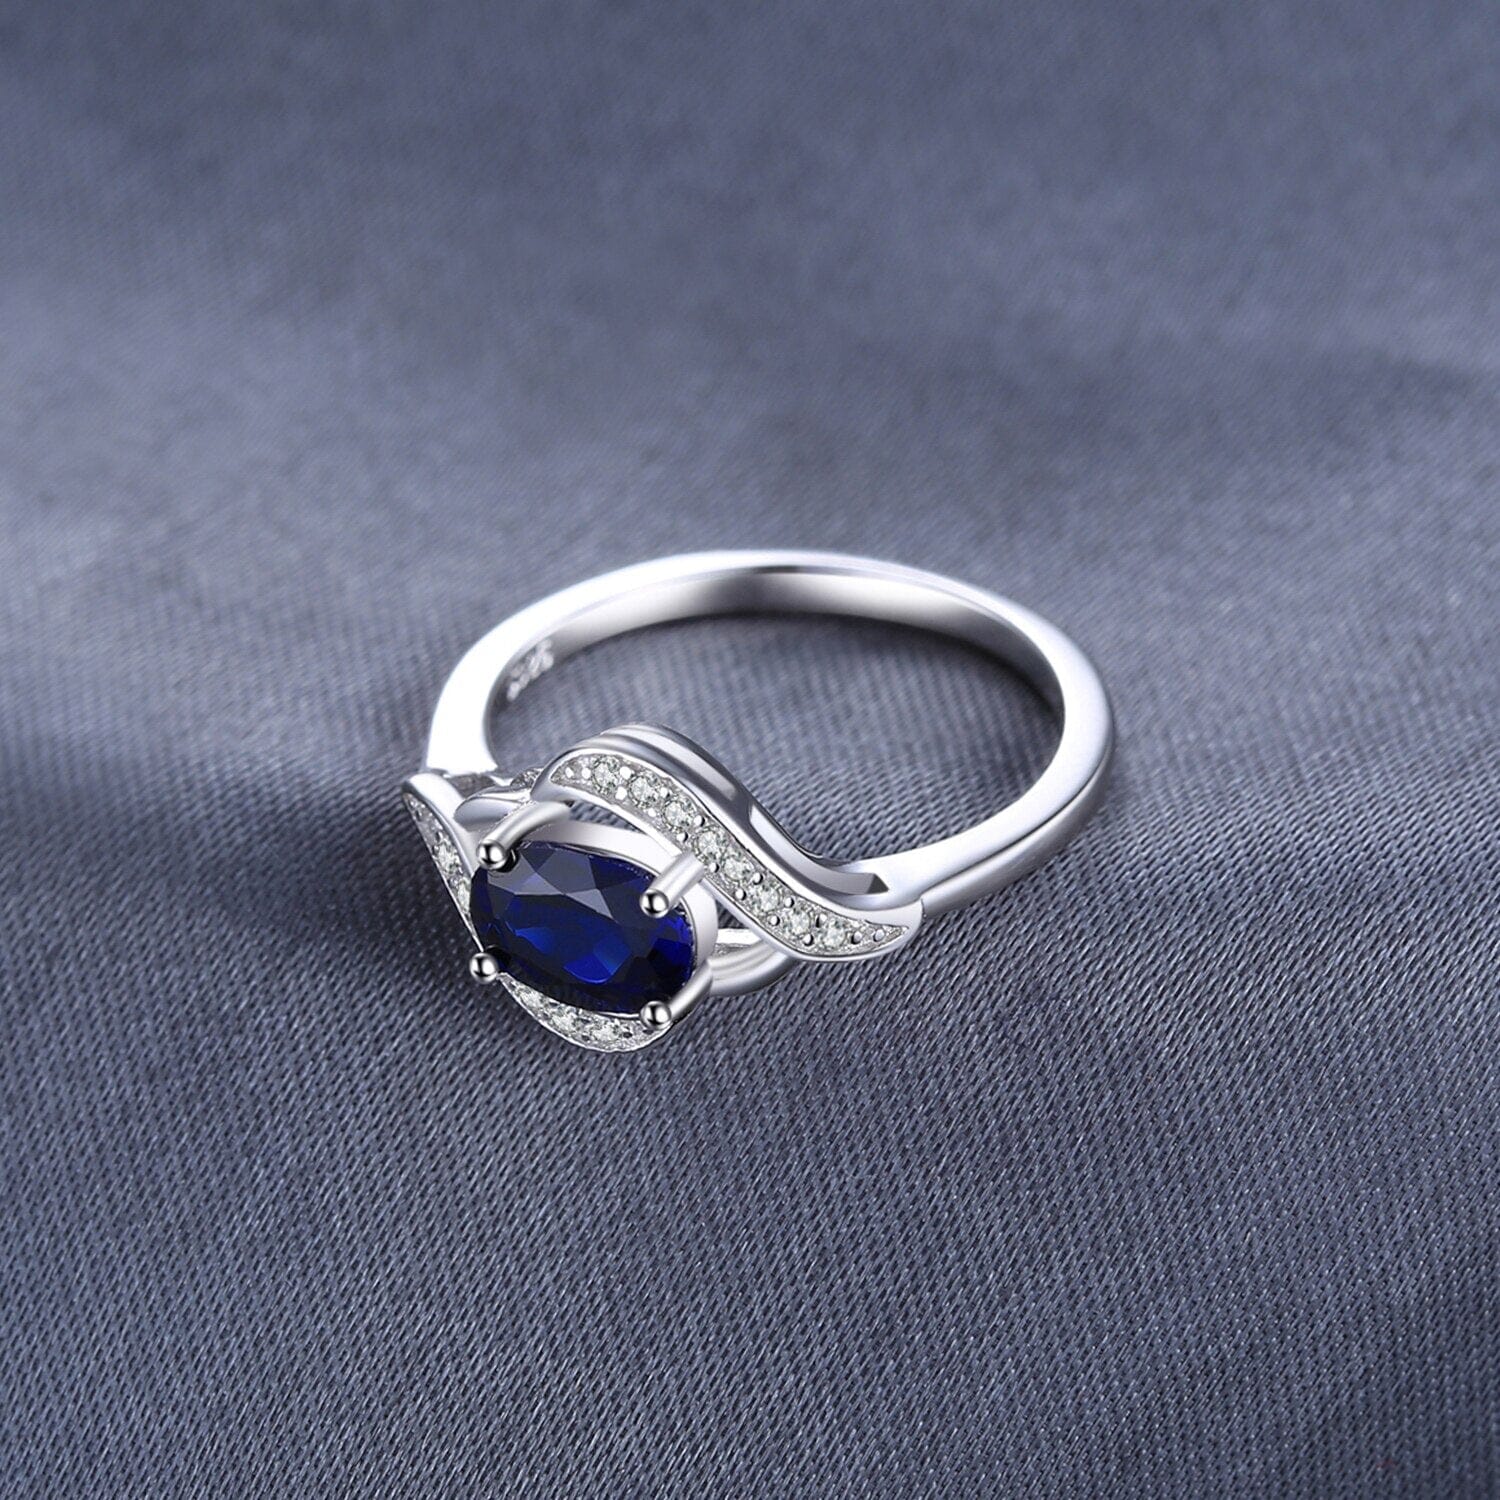 Statement Halo Blue Sapphire Ring - 925 Sterling SilverRing